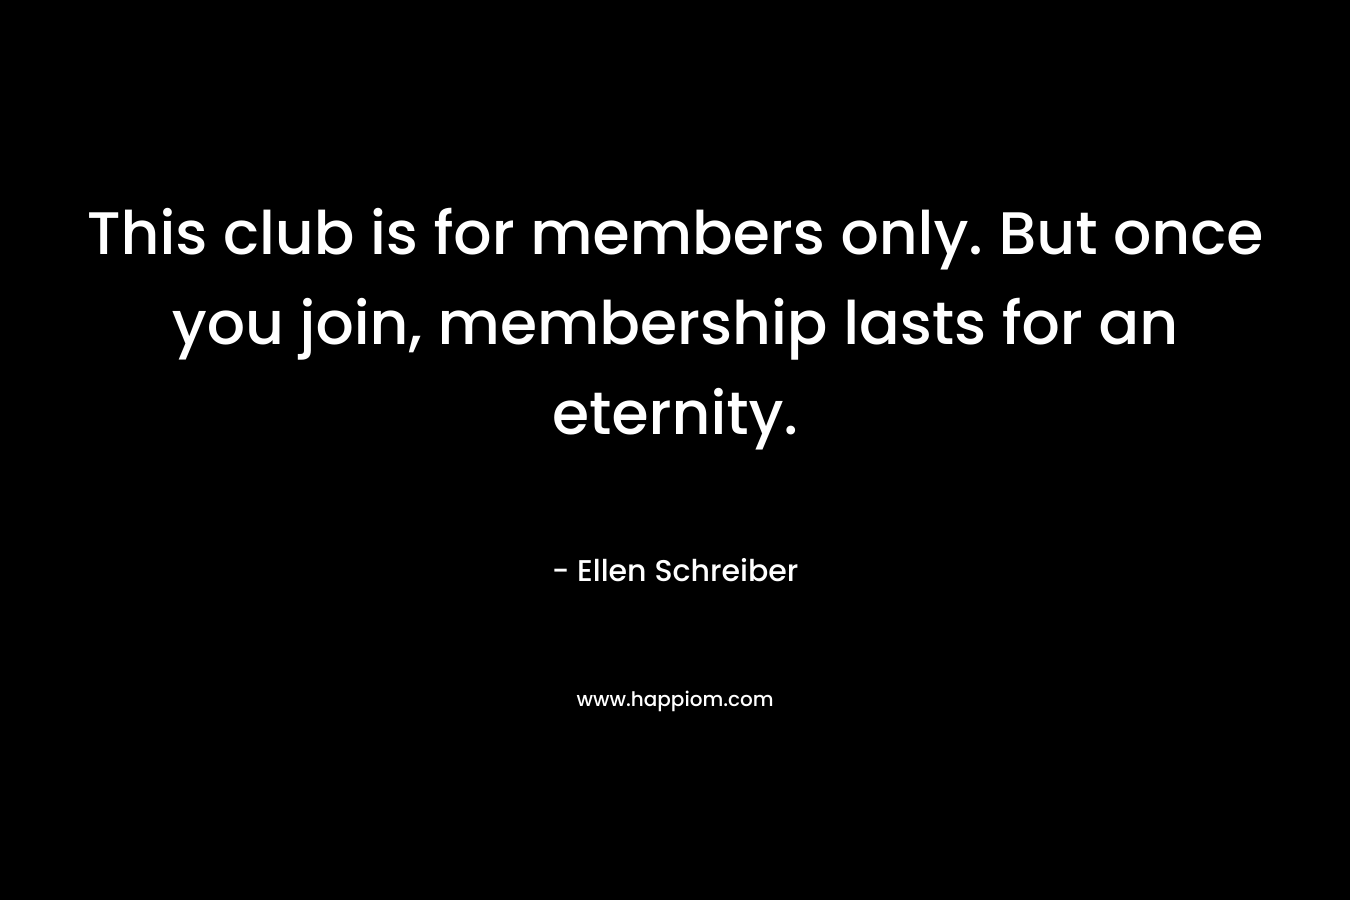 This club is for members only. But once you join, membership lasts for an eternity. – Ellen Schreiber